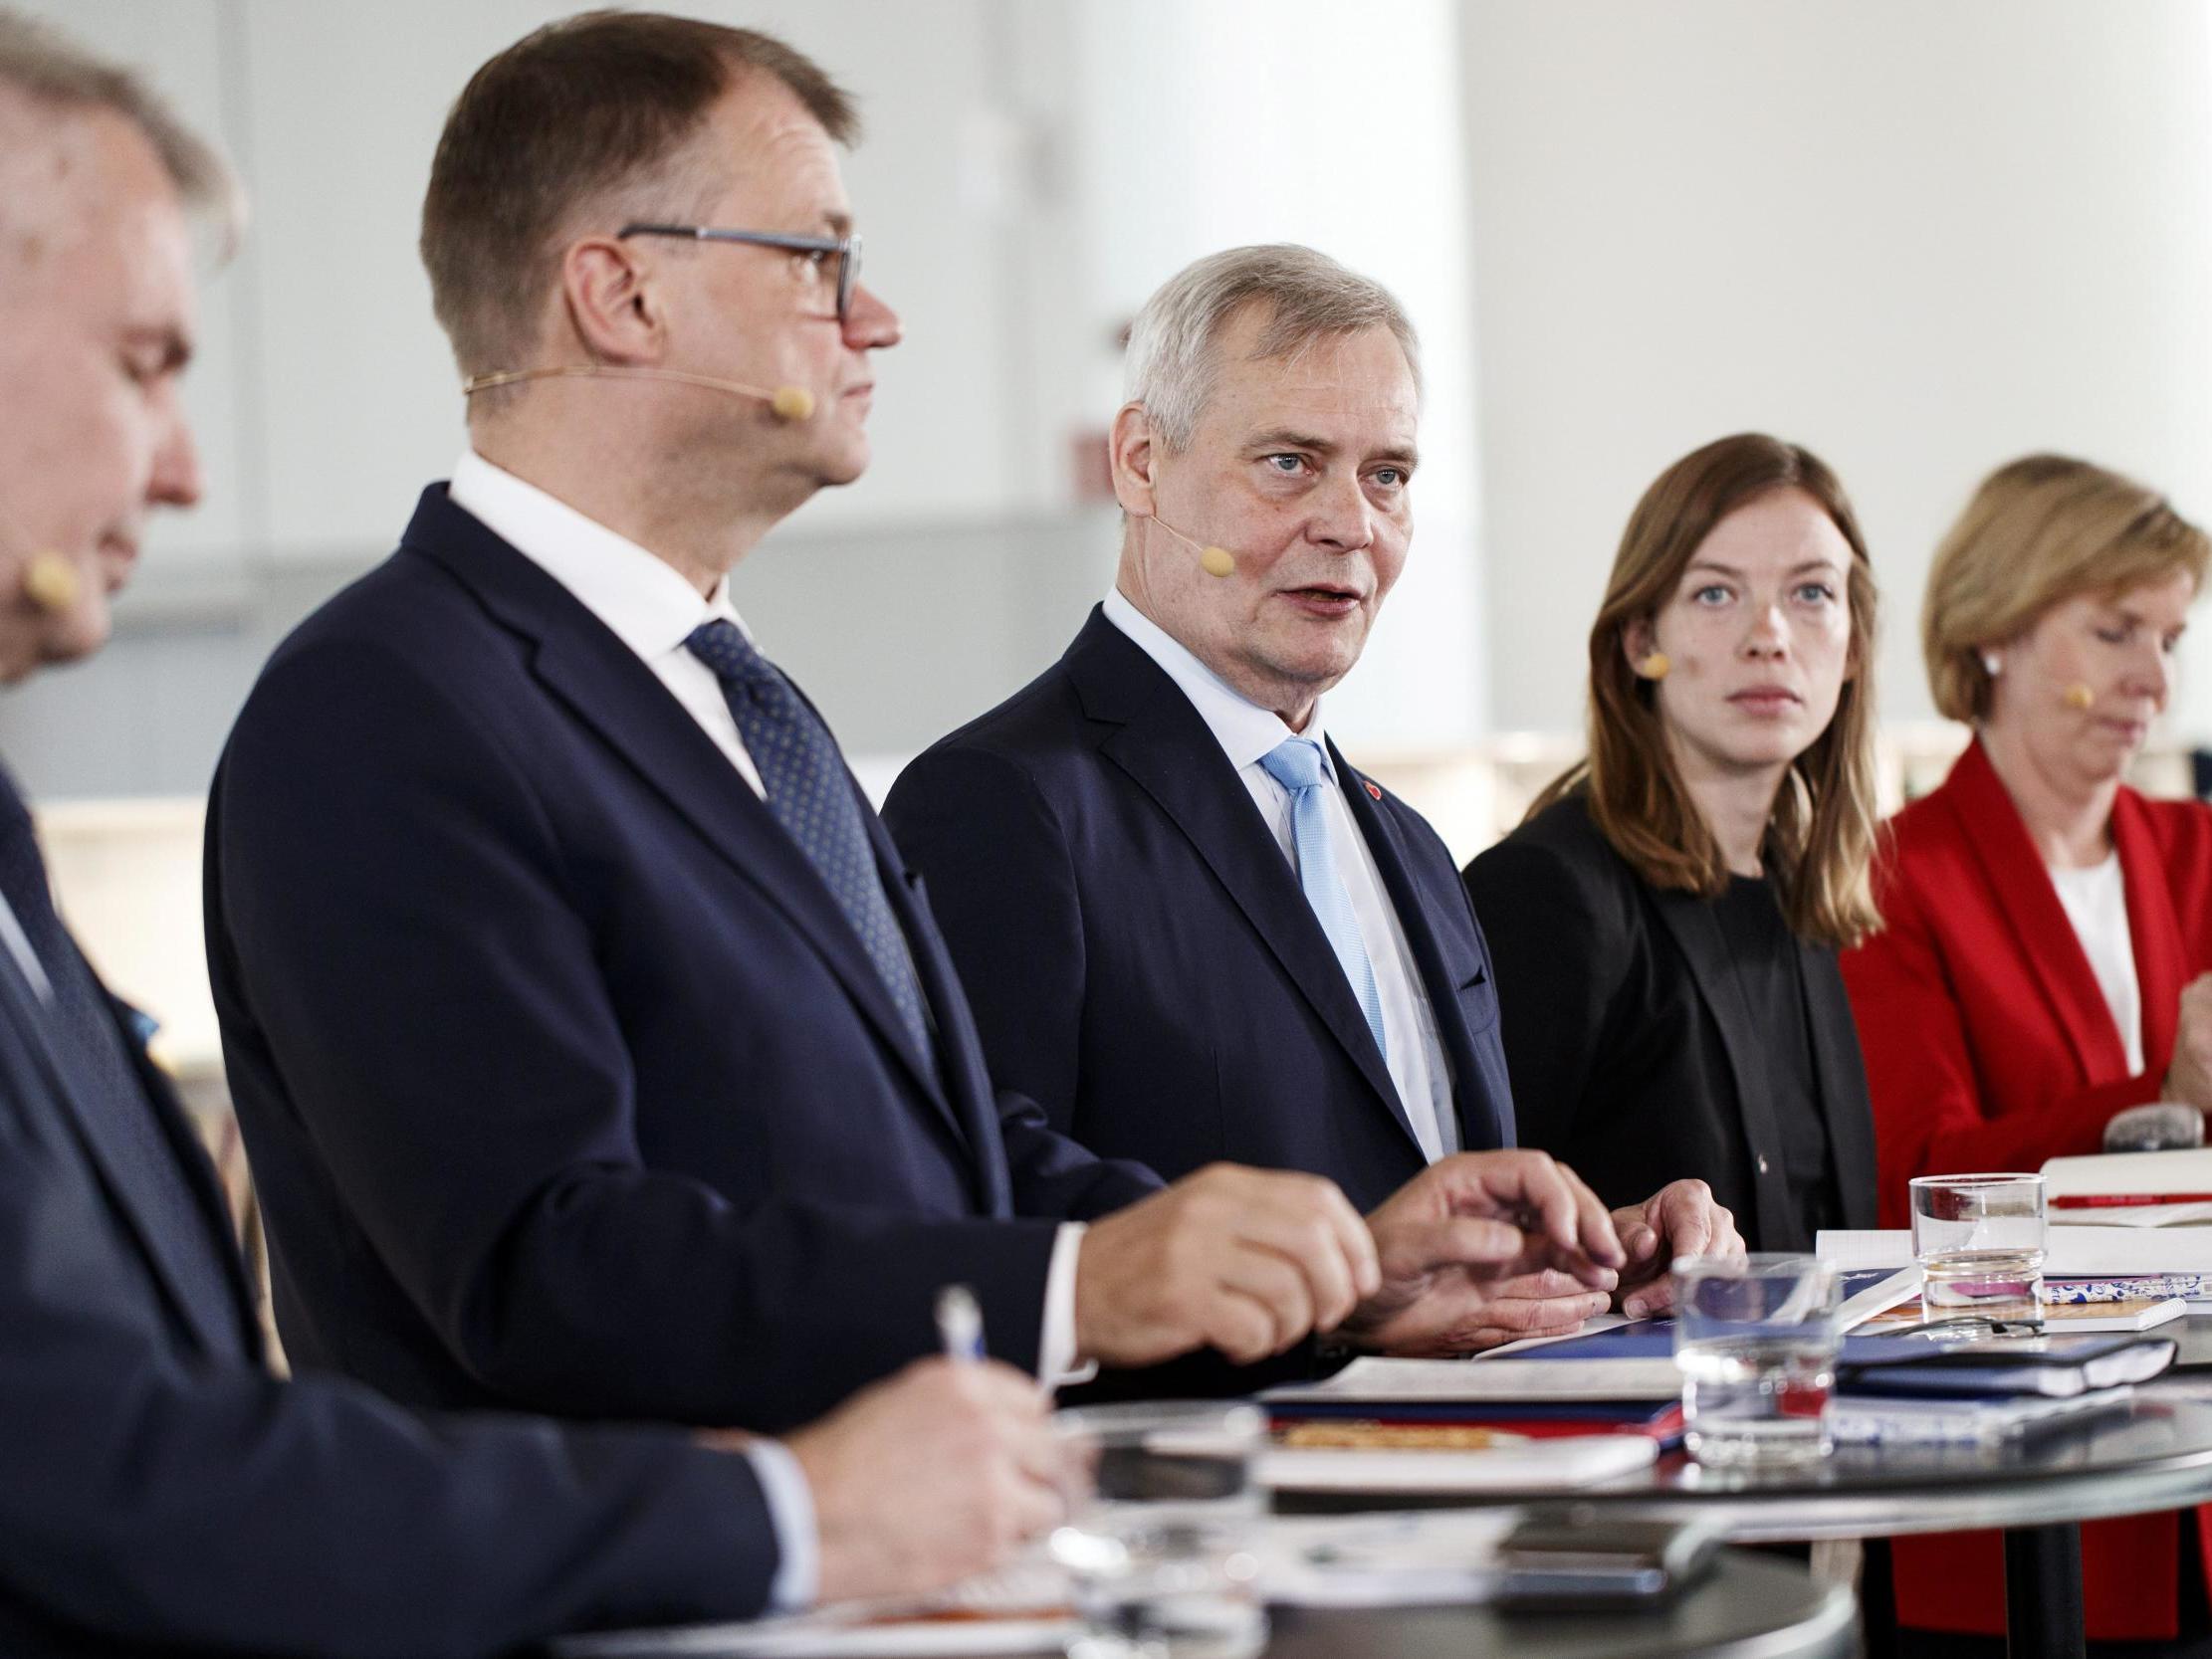 &#13;
Green League Chairman Pekka Haavisto, Centre Party Chairman Juha Sipila, Social Democratic Party Chairman Antti Rinne, Left Alliance Chairwoman Li Andersson and Swedish People's Party Chairwoman Anna-Maja Henriksson are seen during a news conference about the programme of the next Finnish government and ministers in Helsinki, Finland June 3, 2019 &#13;